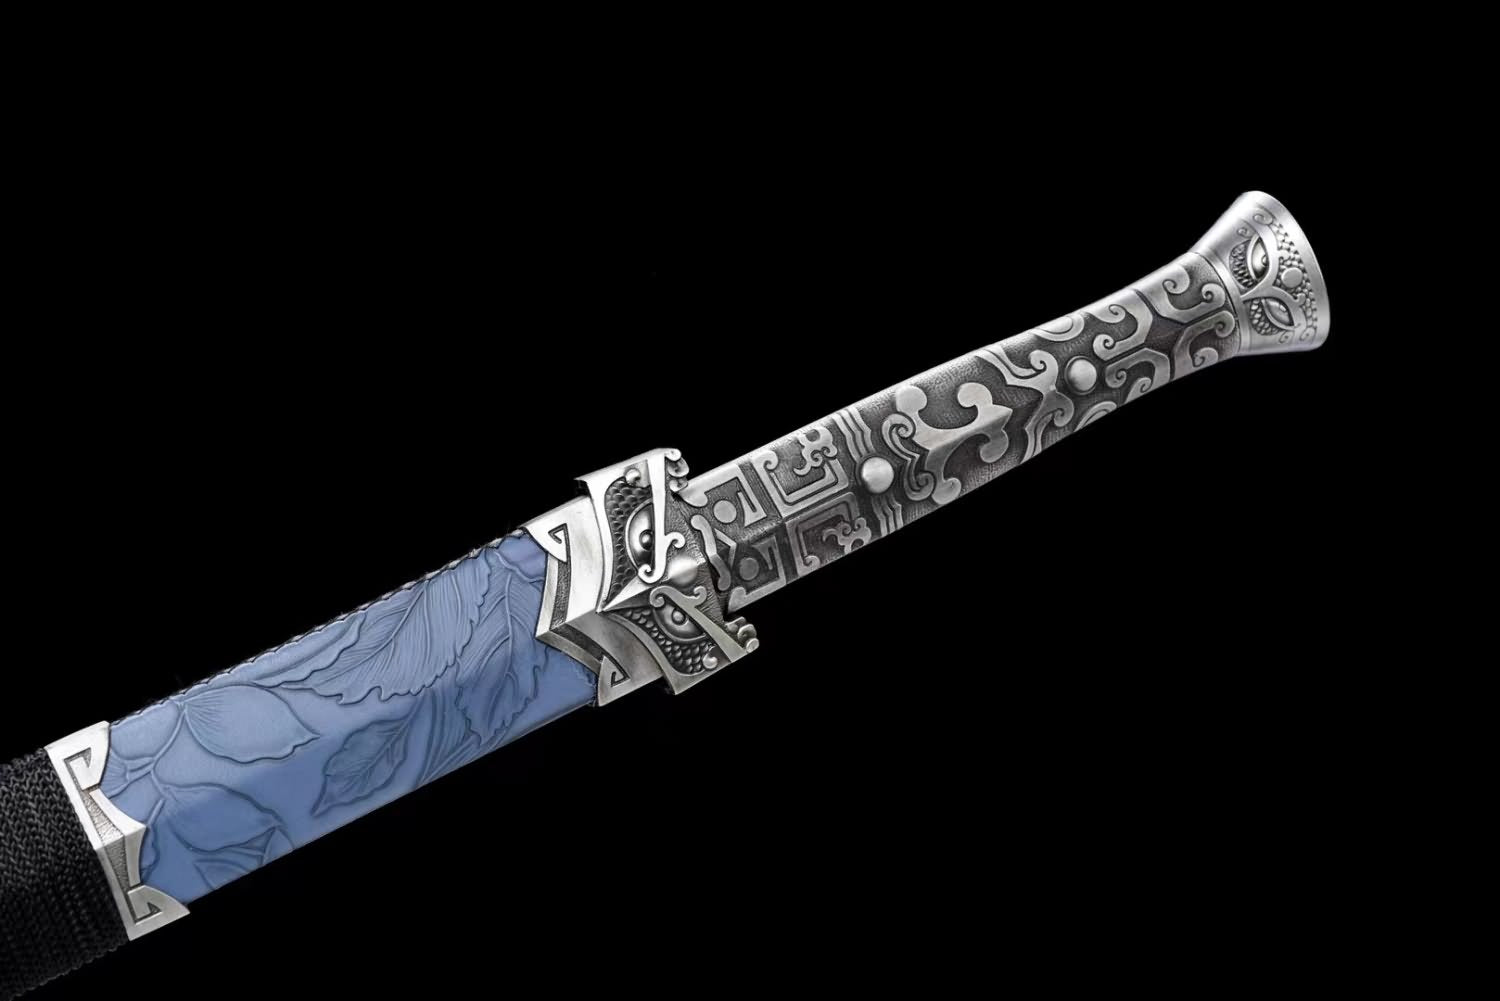  Han jian Sword-Forged High Carbon Steel Blade,Blue Appearance,Faux Leather Scabbard